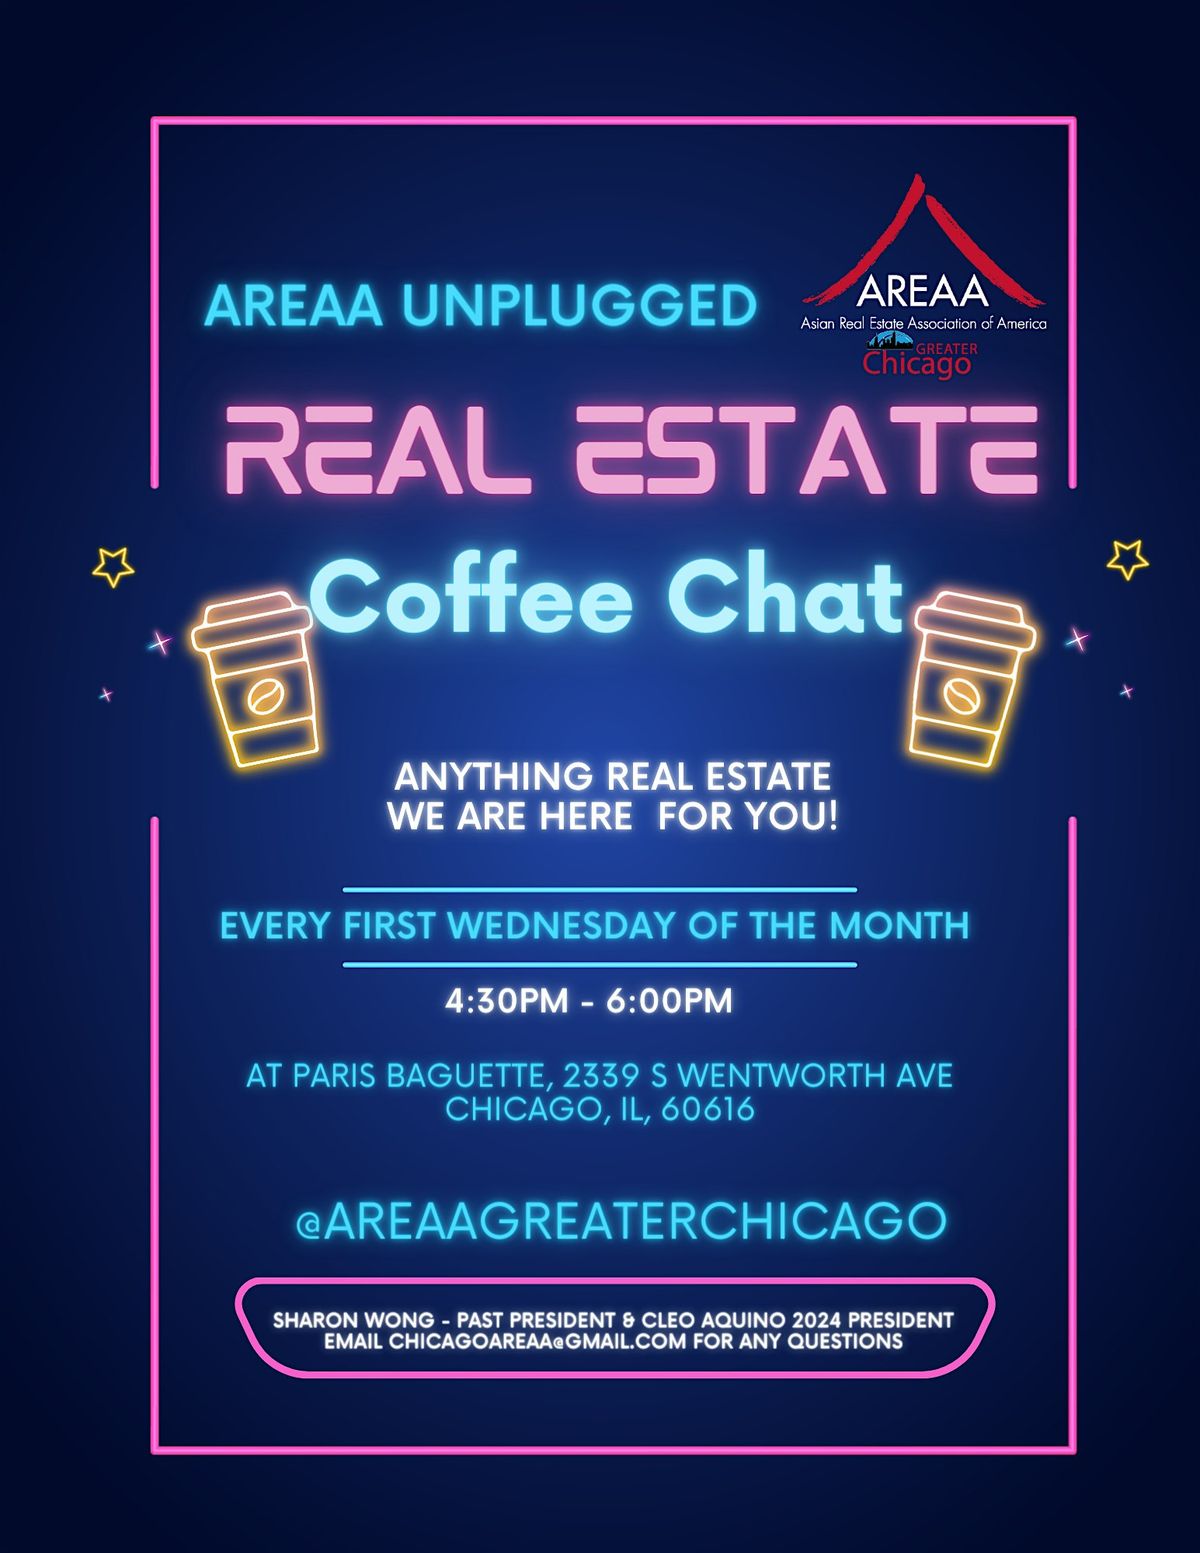 Real Estate Coffee Chat